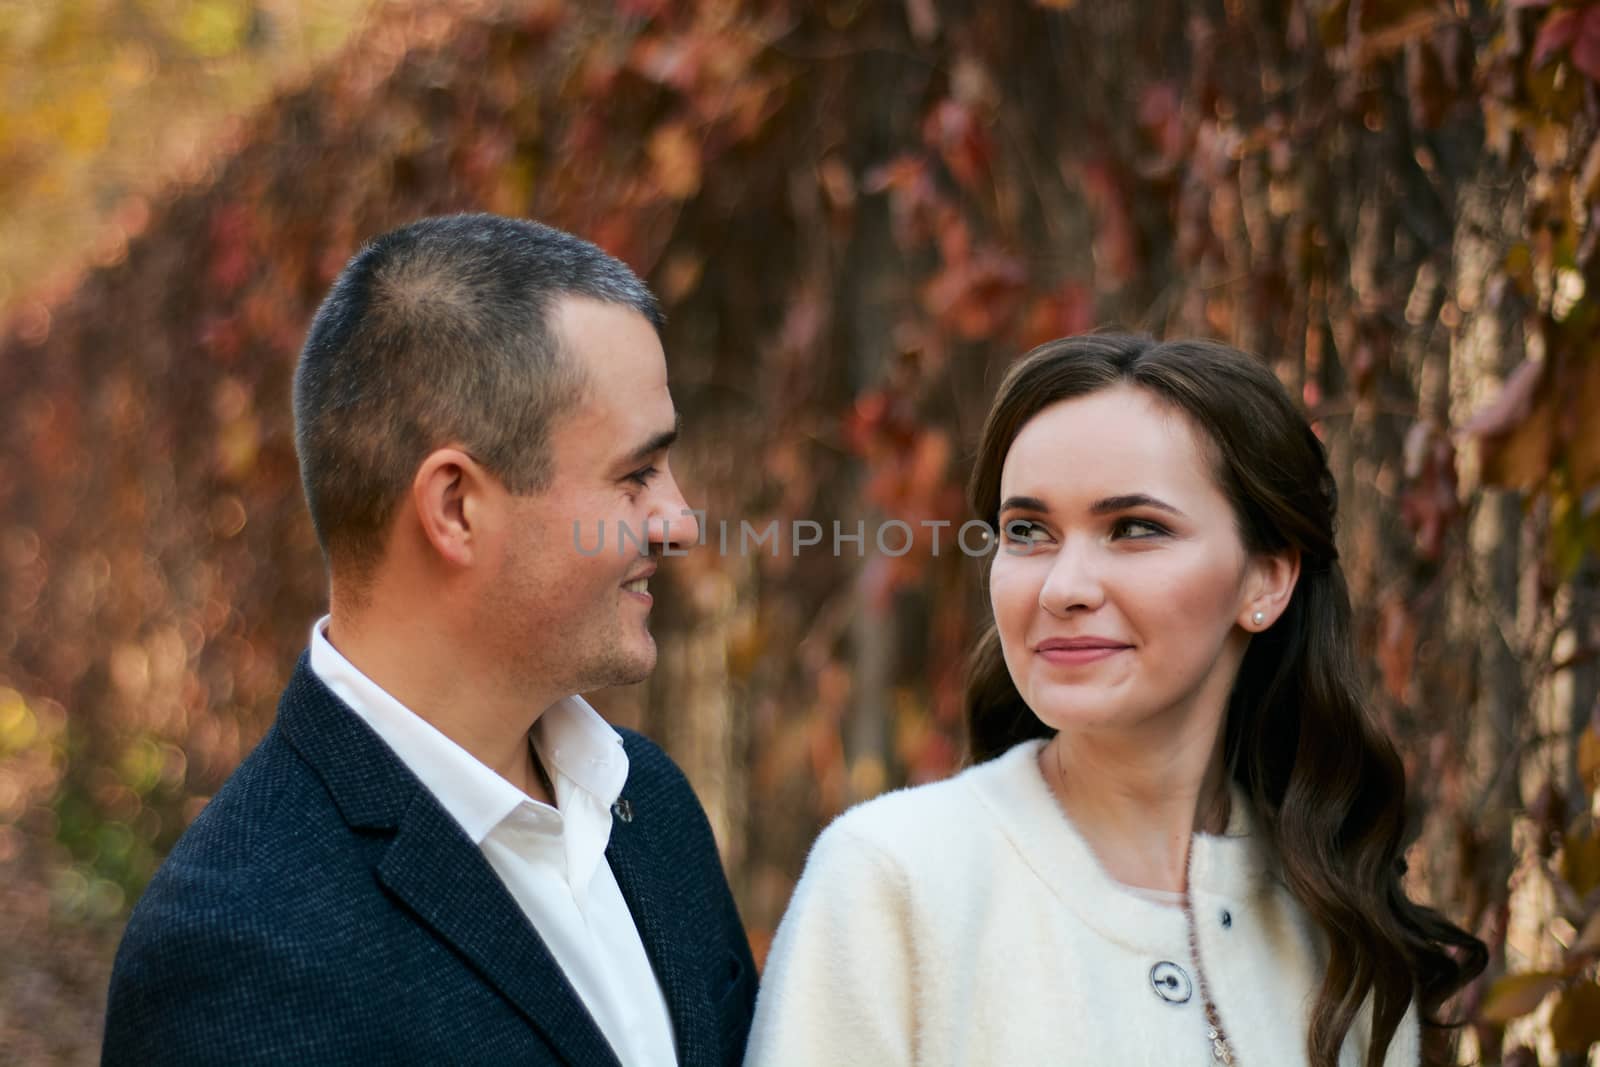 Couple in love close-up portrait. Young male and woman just married. Concept of happy family. Modern family outdoor.